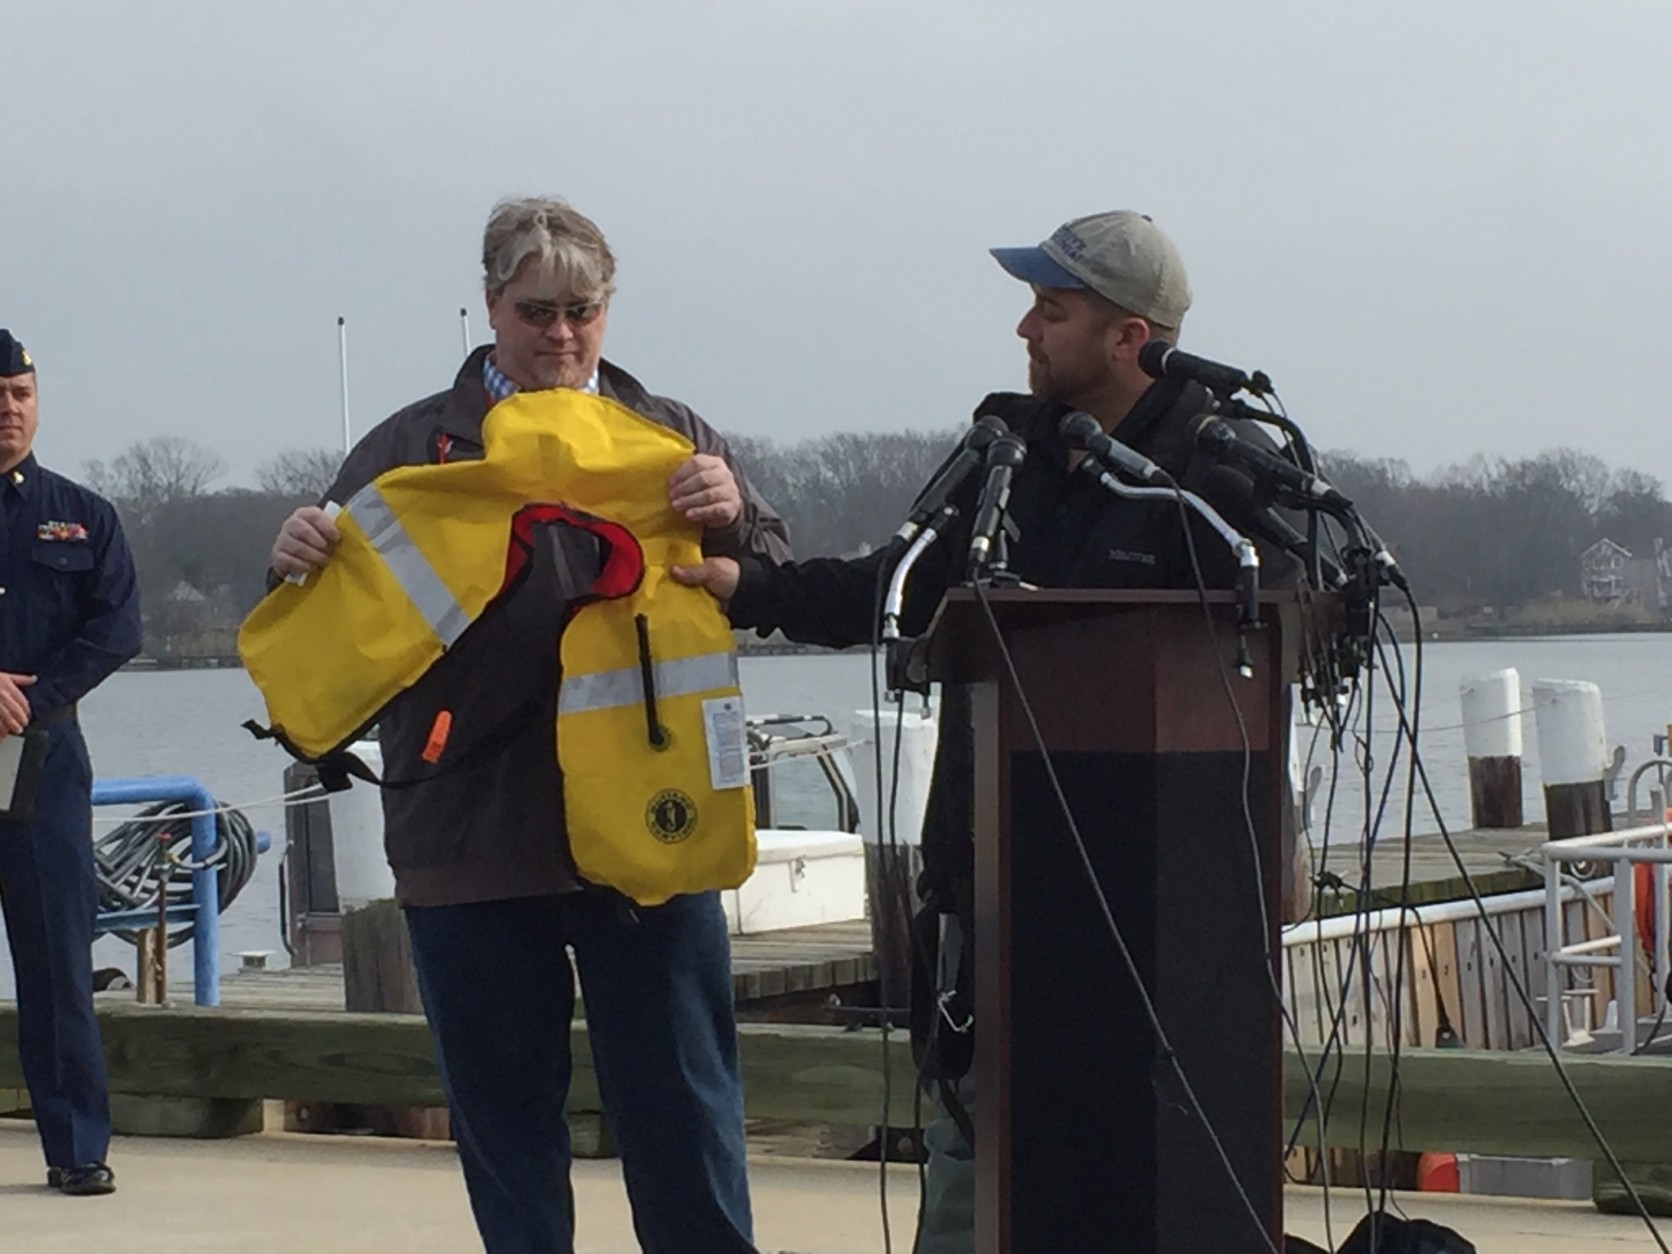 The two men praised the coordinated response, and Coast Guard Cmdr. Michael Keane returned the compliment – praising the pair for NOT adding to Maryland’s 21 water-related fatalities in 2015. (WTOP/Rich Johnson)